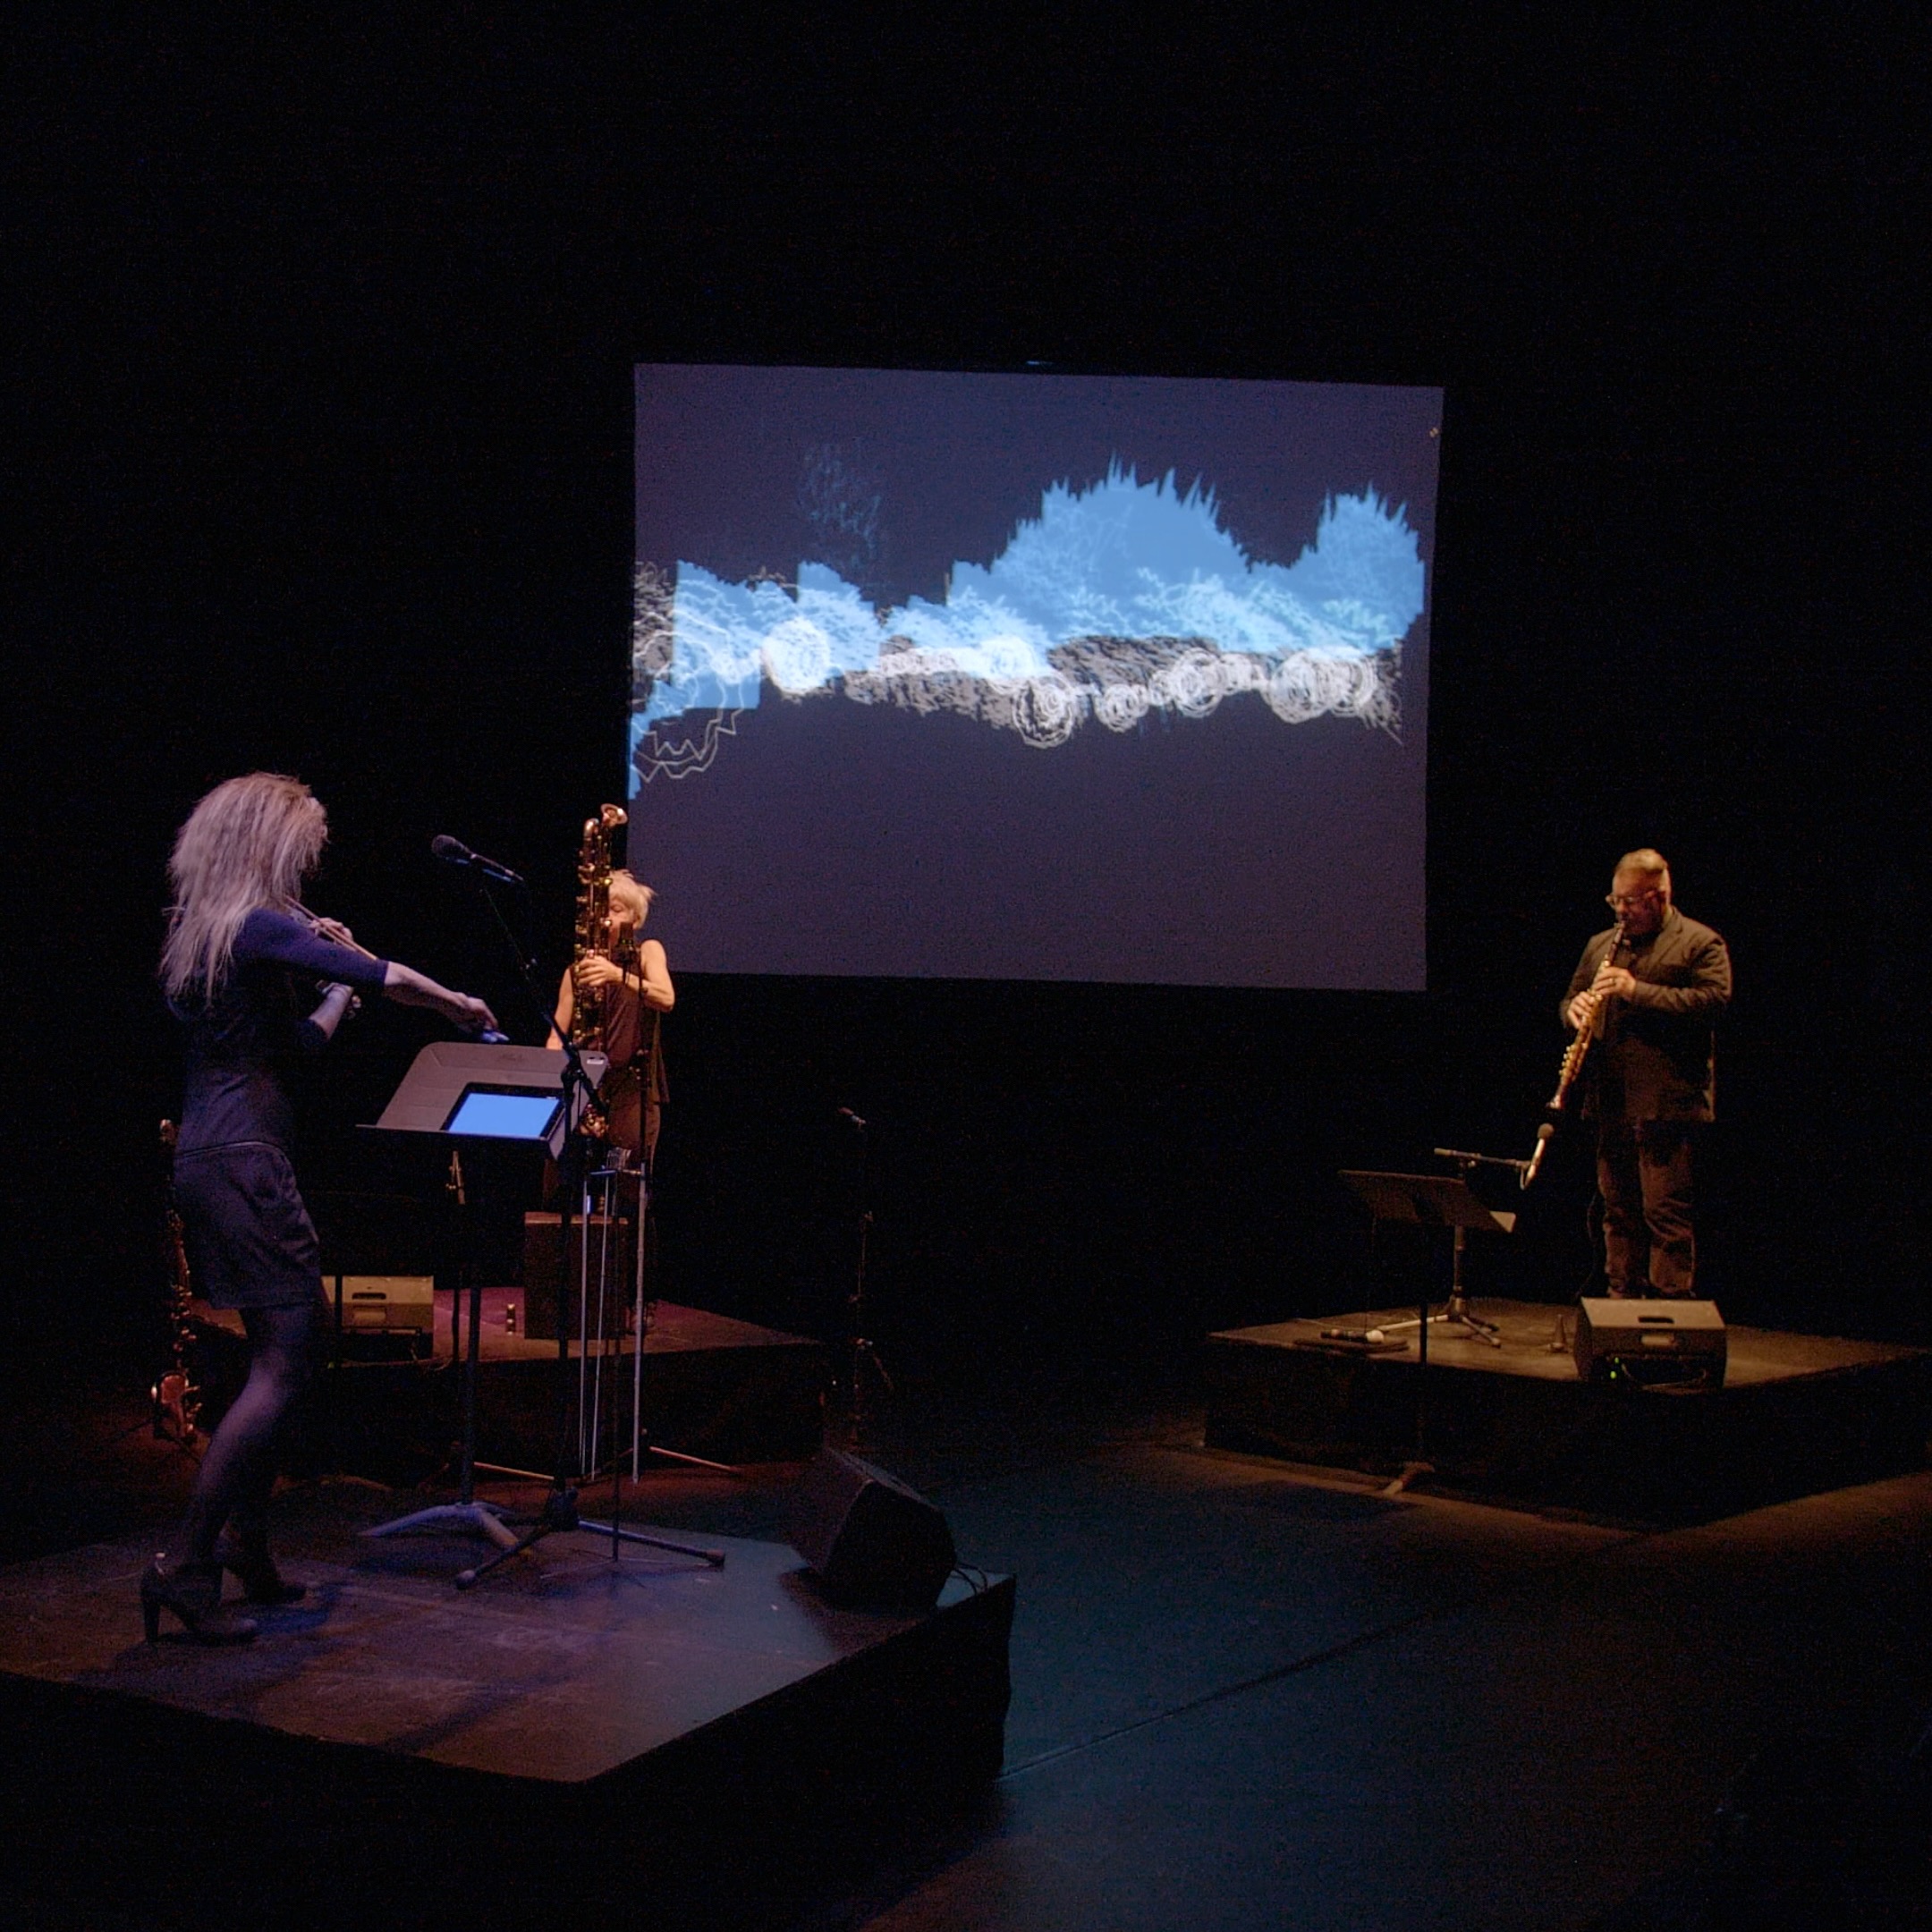 A trio performing in front of a screen with blue images.